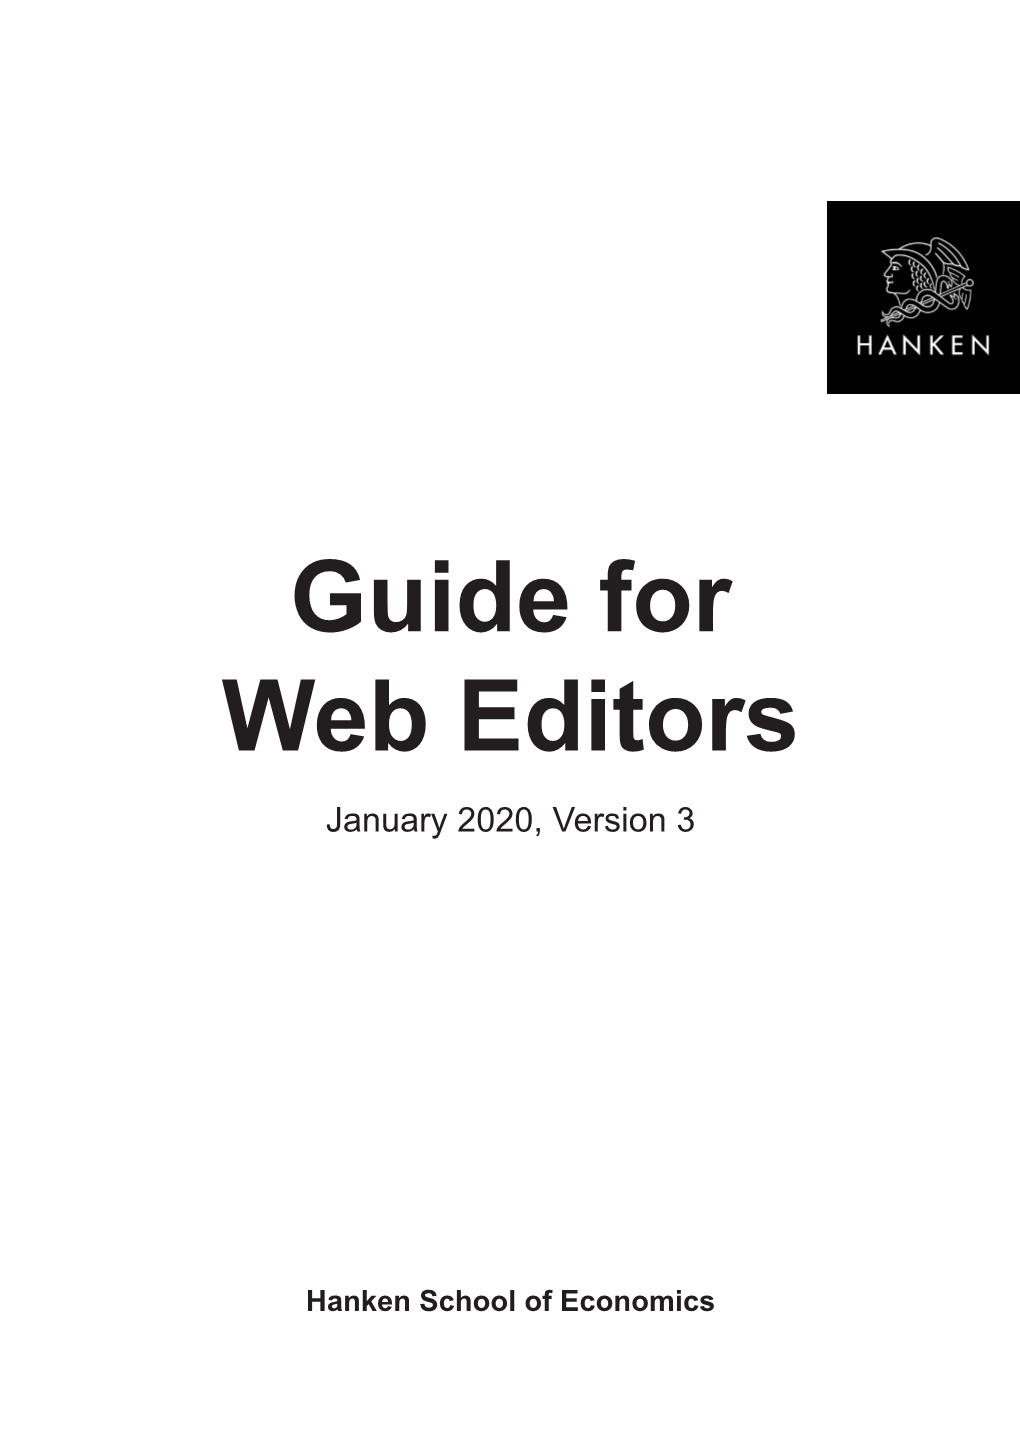 Guide for Web Editors January 2020, Version 3